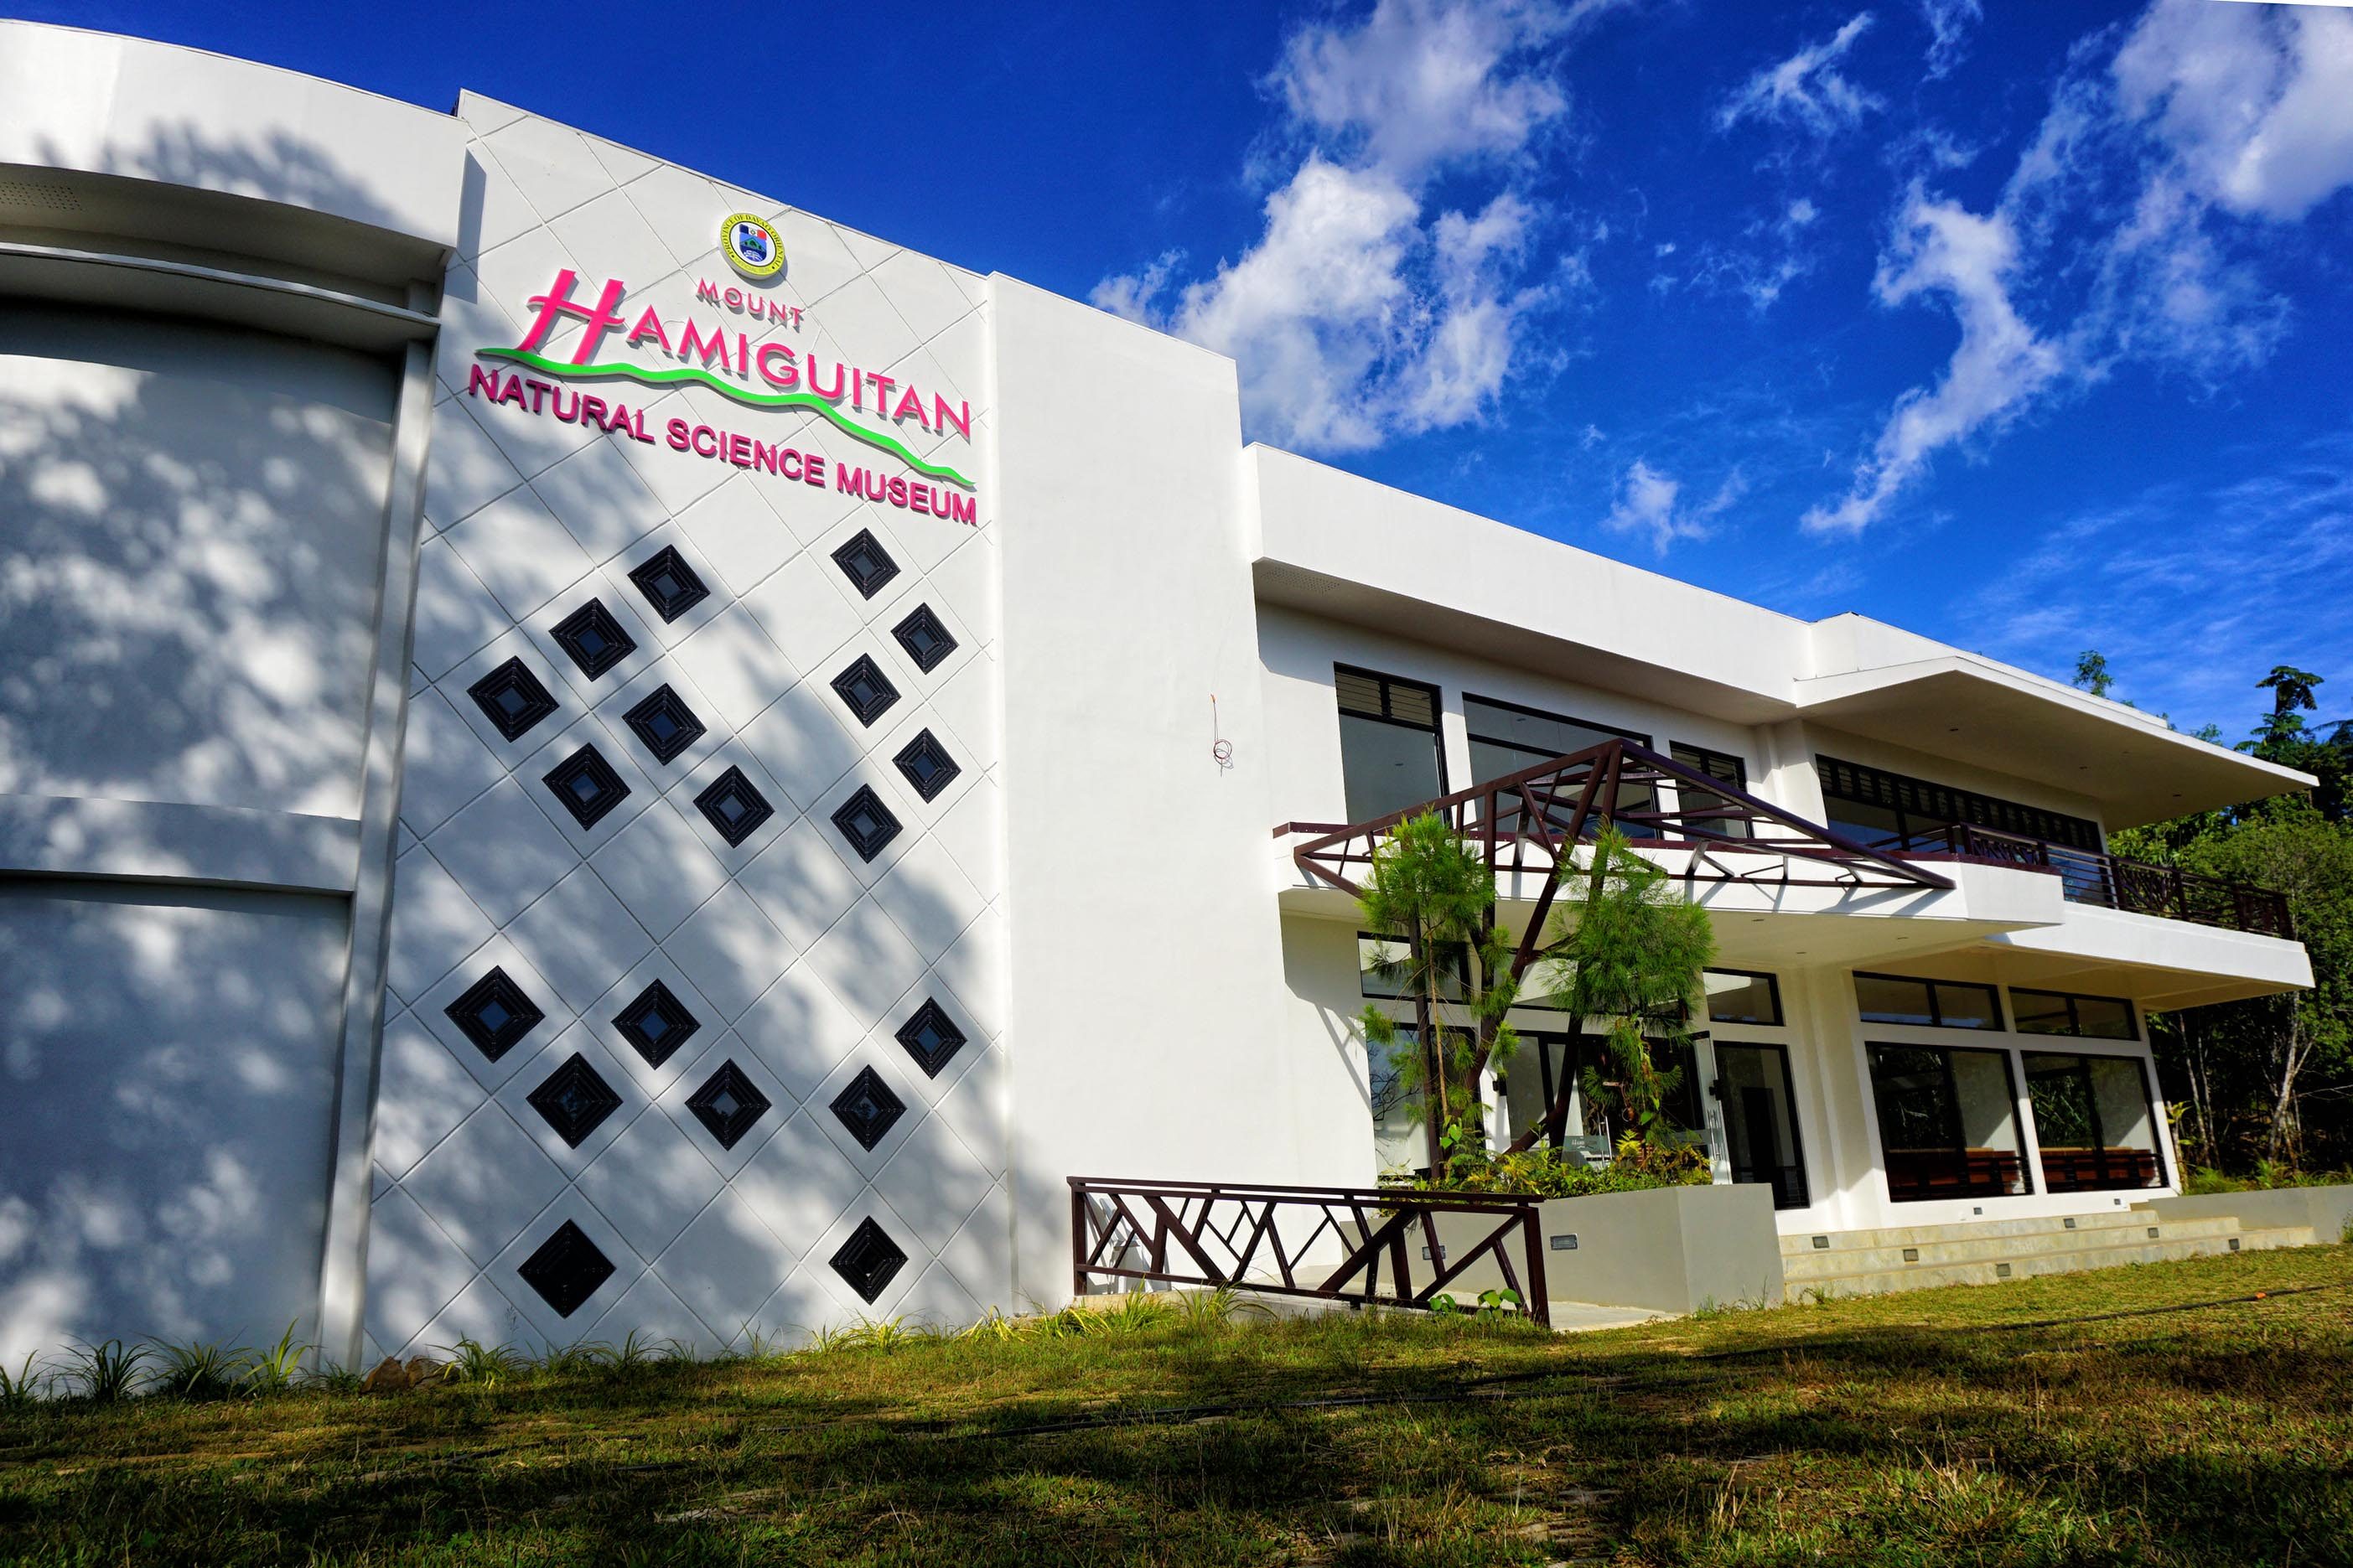 The Mt. Hamiguitan Natural Science Museum is now open at the foot of the UNESCO World Heritage Site in San Isidro town in Davao Oriental. Photo by Louie Lapat 